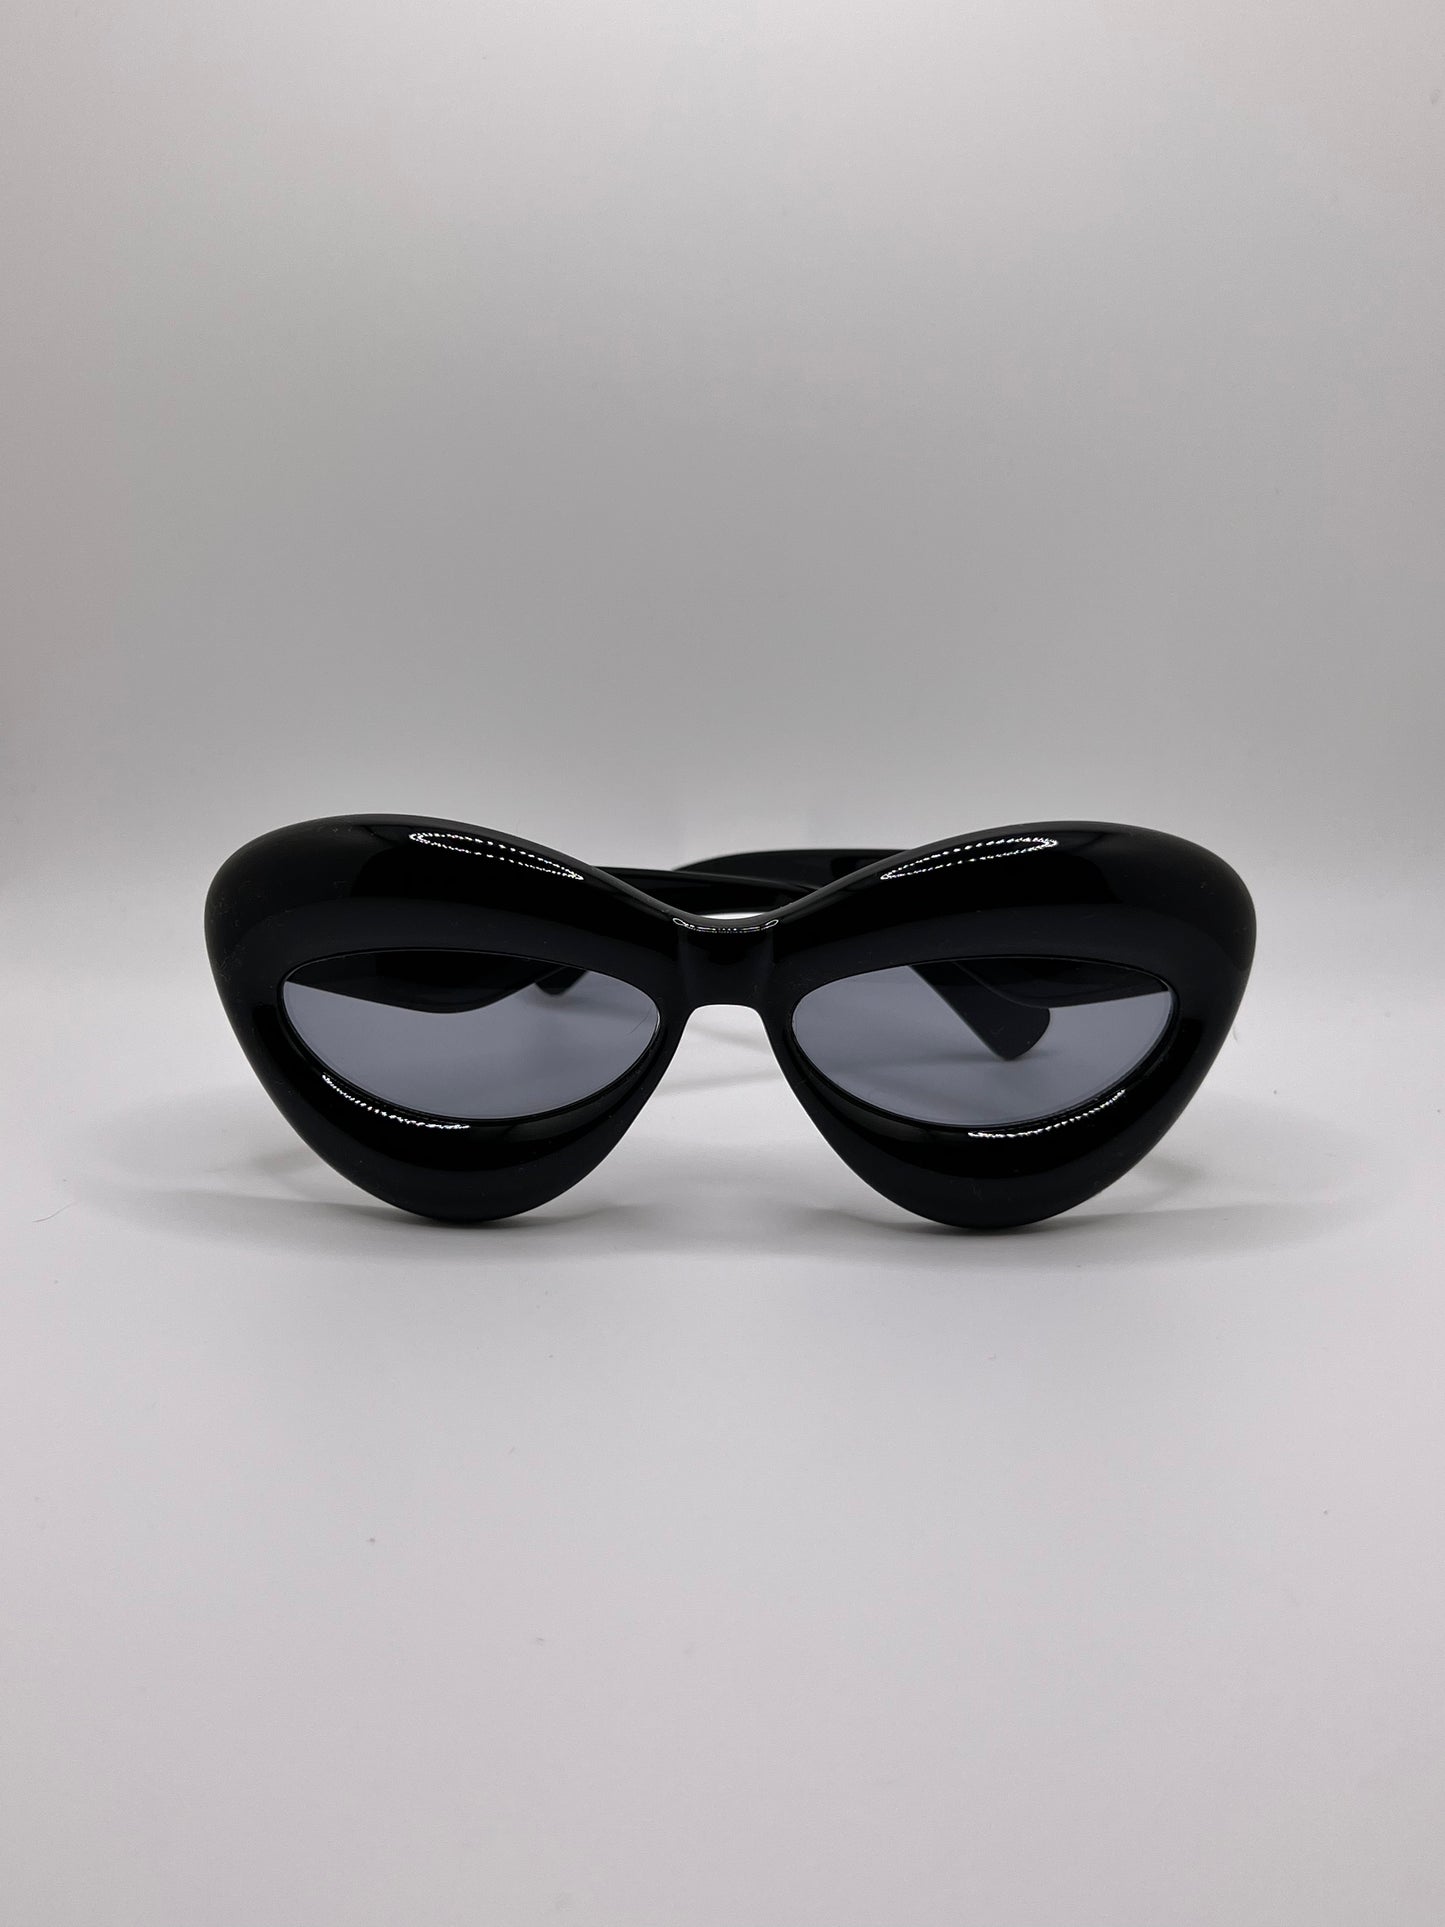  These inflated sunglasses in black are giving effortless icon. Try them in every color and add a splash of extra to any outfit. These work for formal events or a day of errands and will make you feel glam every step of the way.